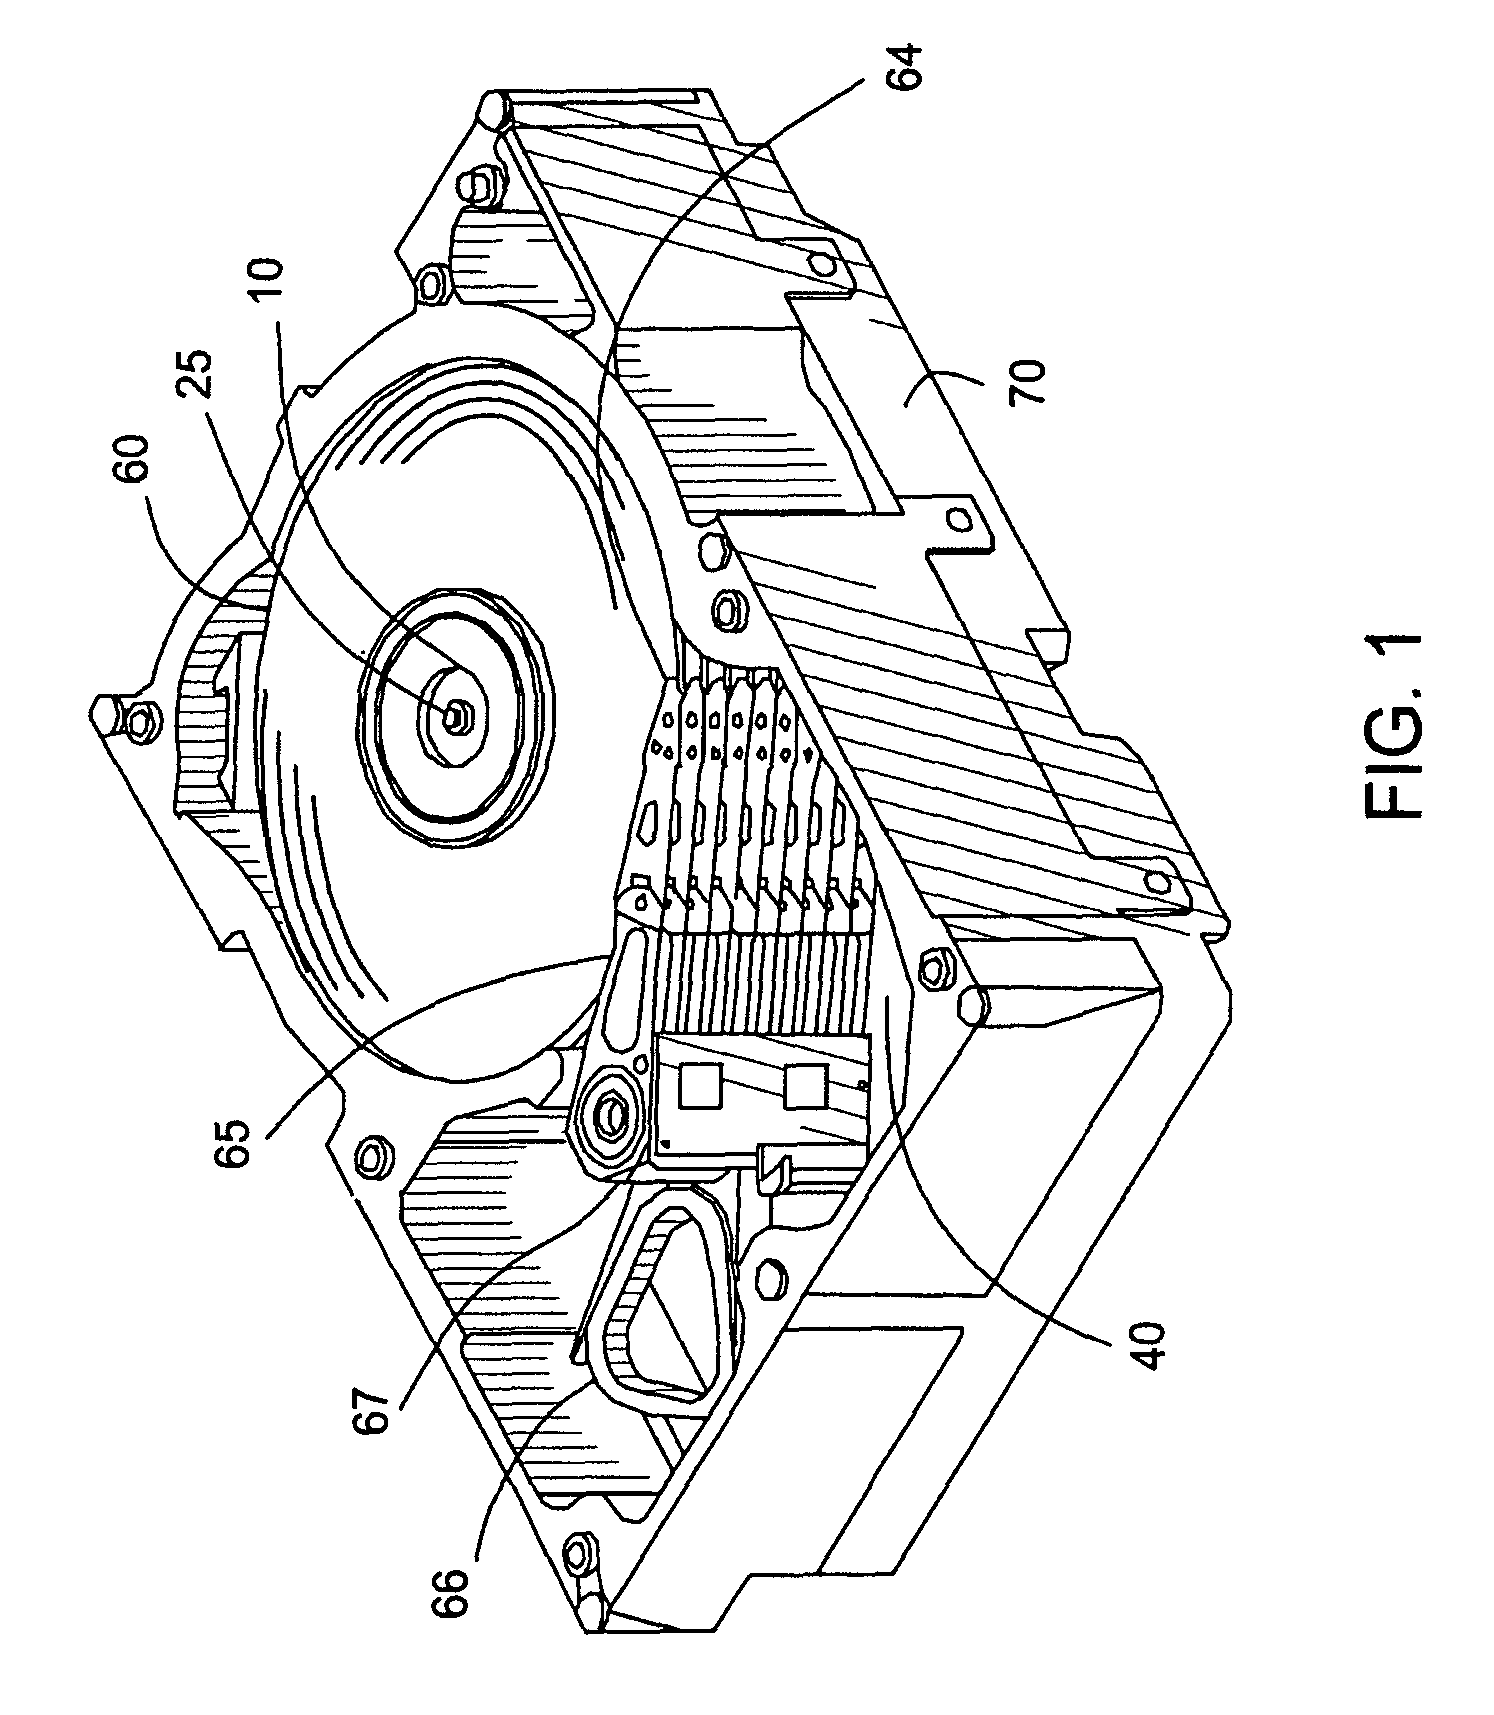 Multiple radial/axial surfaces to enhance fluid bearing performance